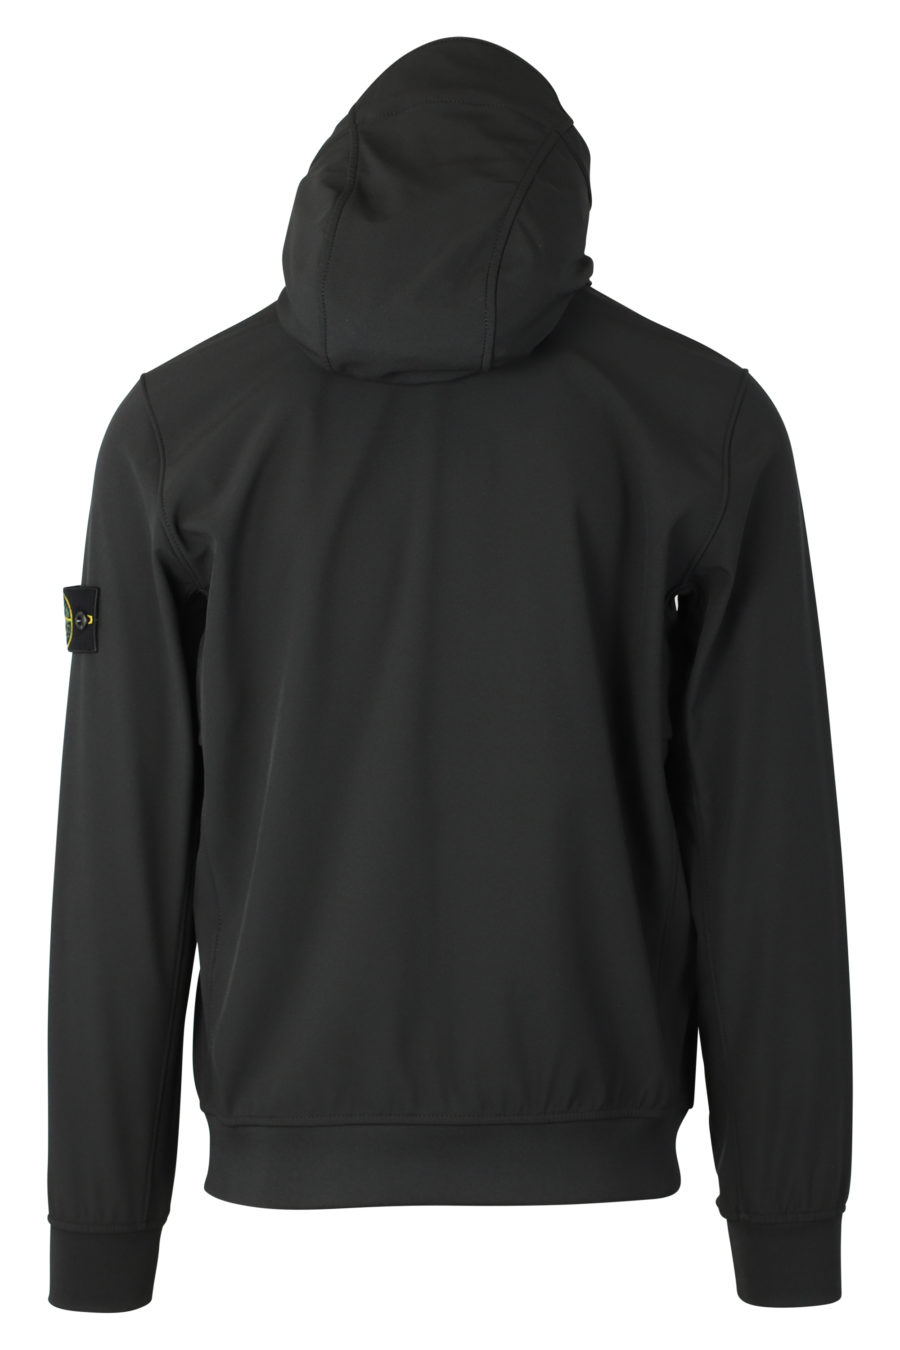 Black jacket with hood and logo patch - IMG 9320